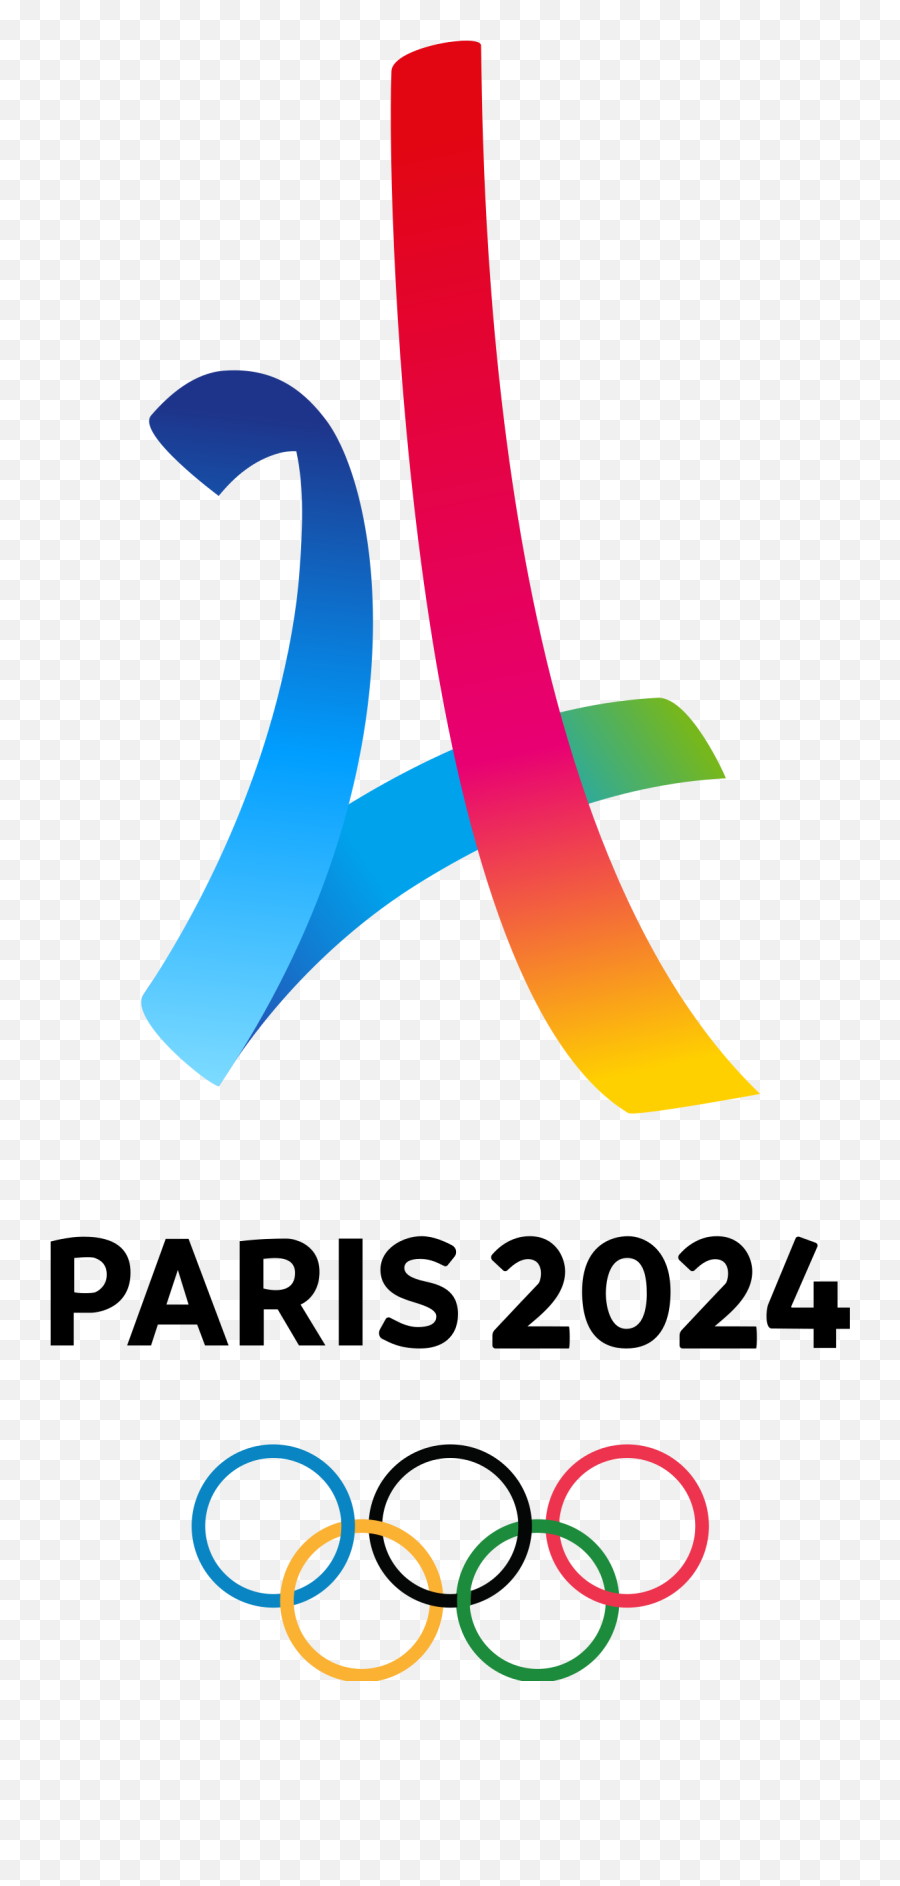 Logo For The 2024 Summer Olympics In Paris Unveiled - Sports Paris ...